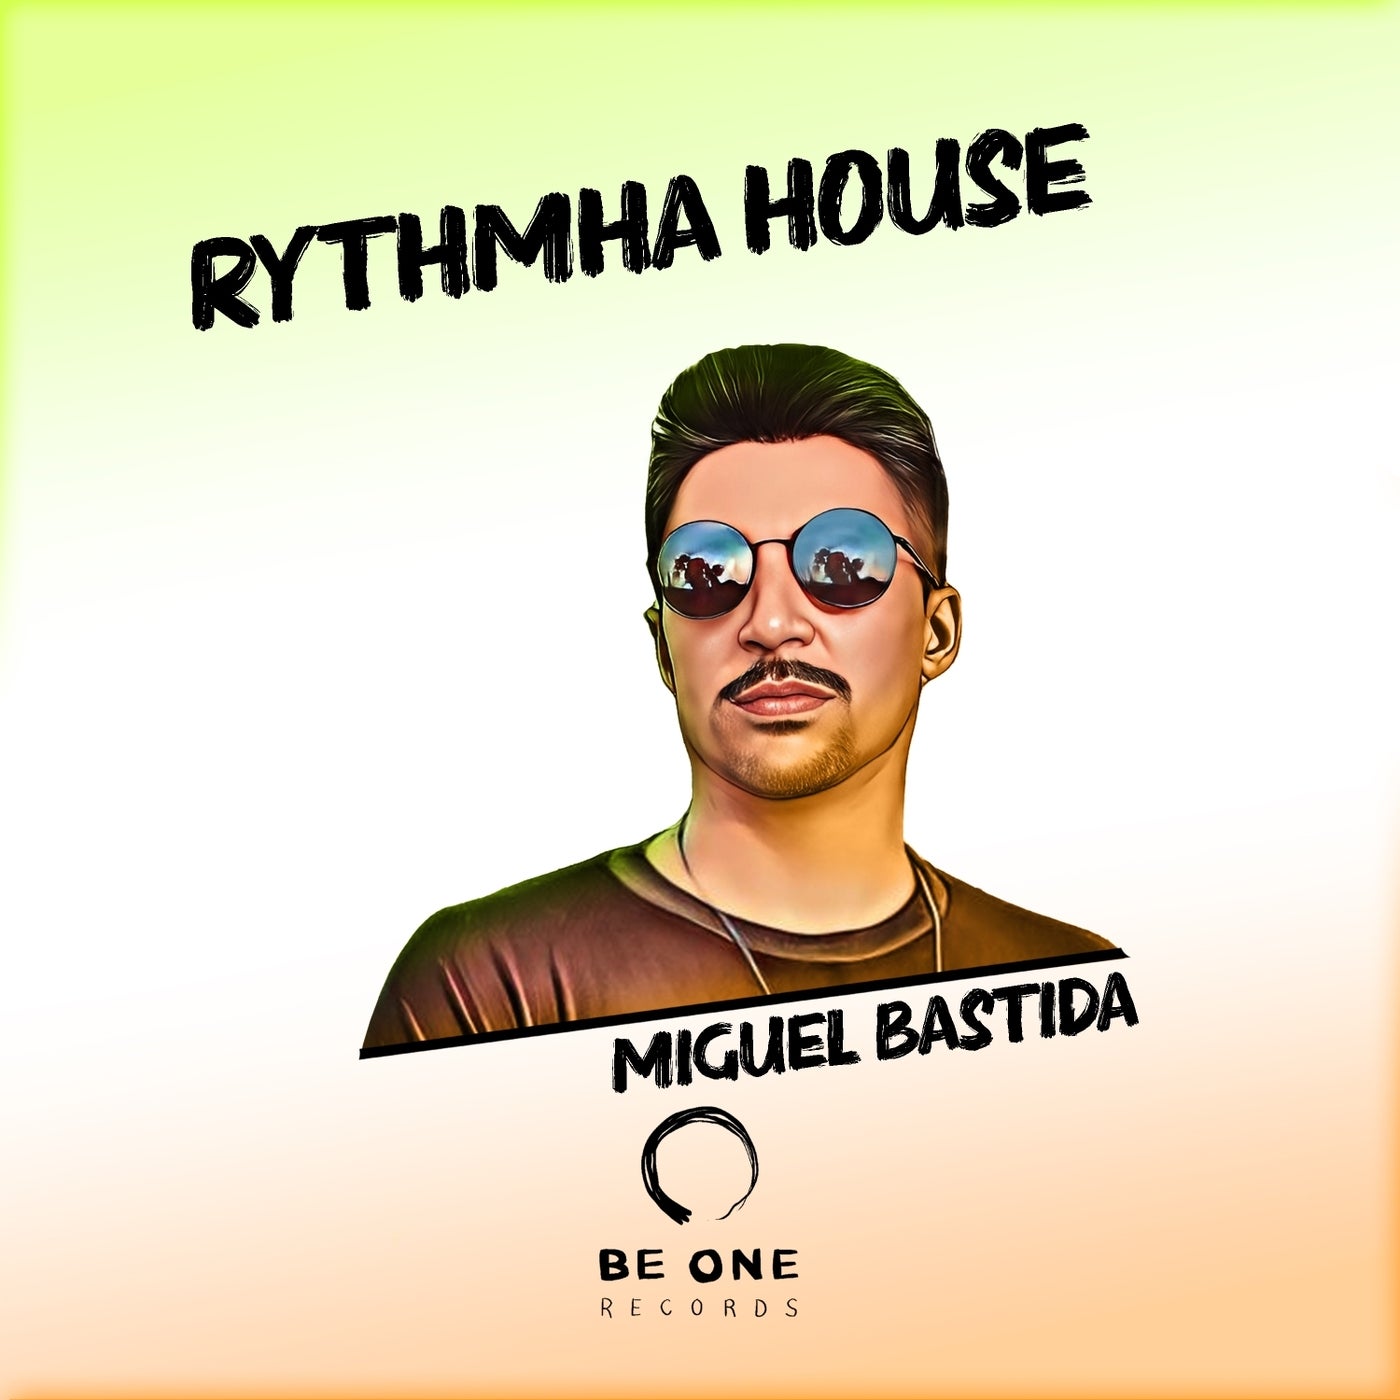 image cover: Miguel Bastida - Rythmha House on Be One Records